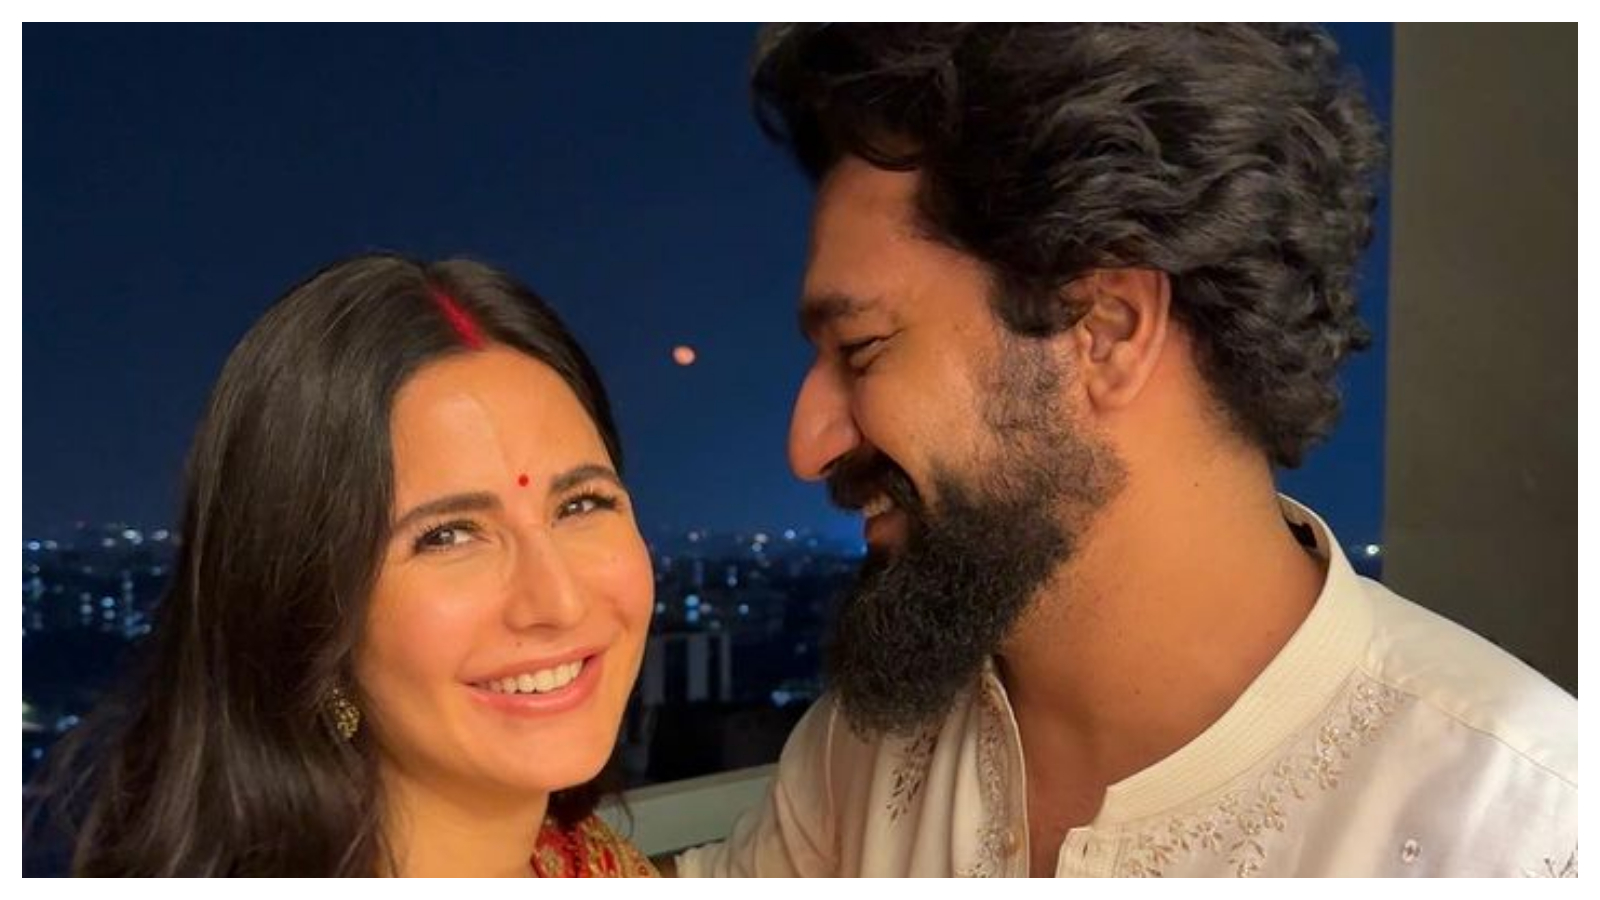 Vicky Kaushal reveals the ‘red flag’ behaviour he had to change for Katrina Kaif: ‘The biggest complaint she had…’ | Bollywood News